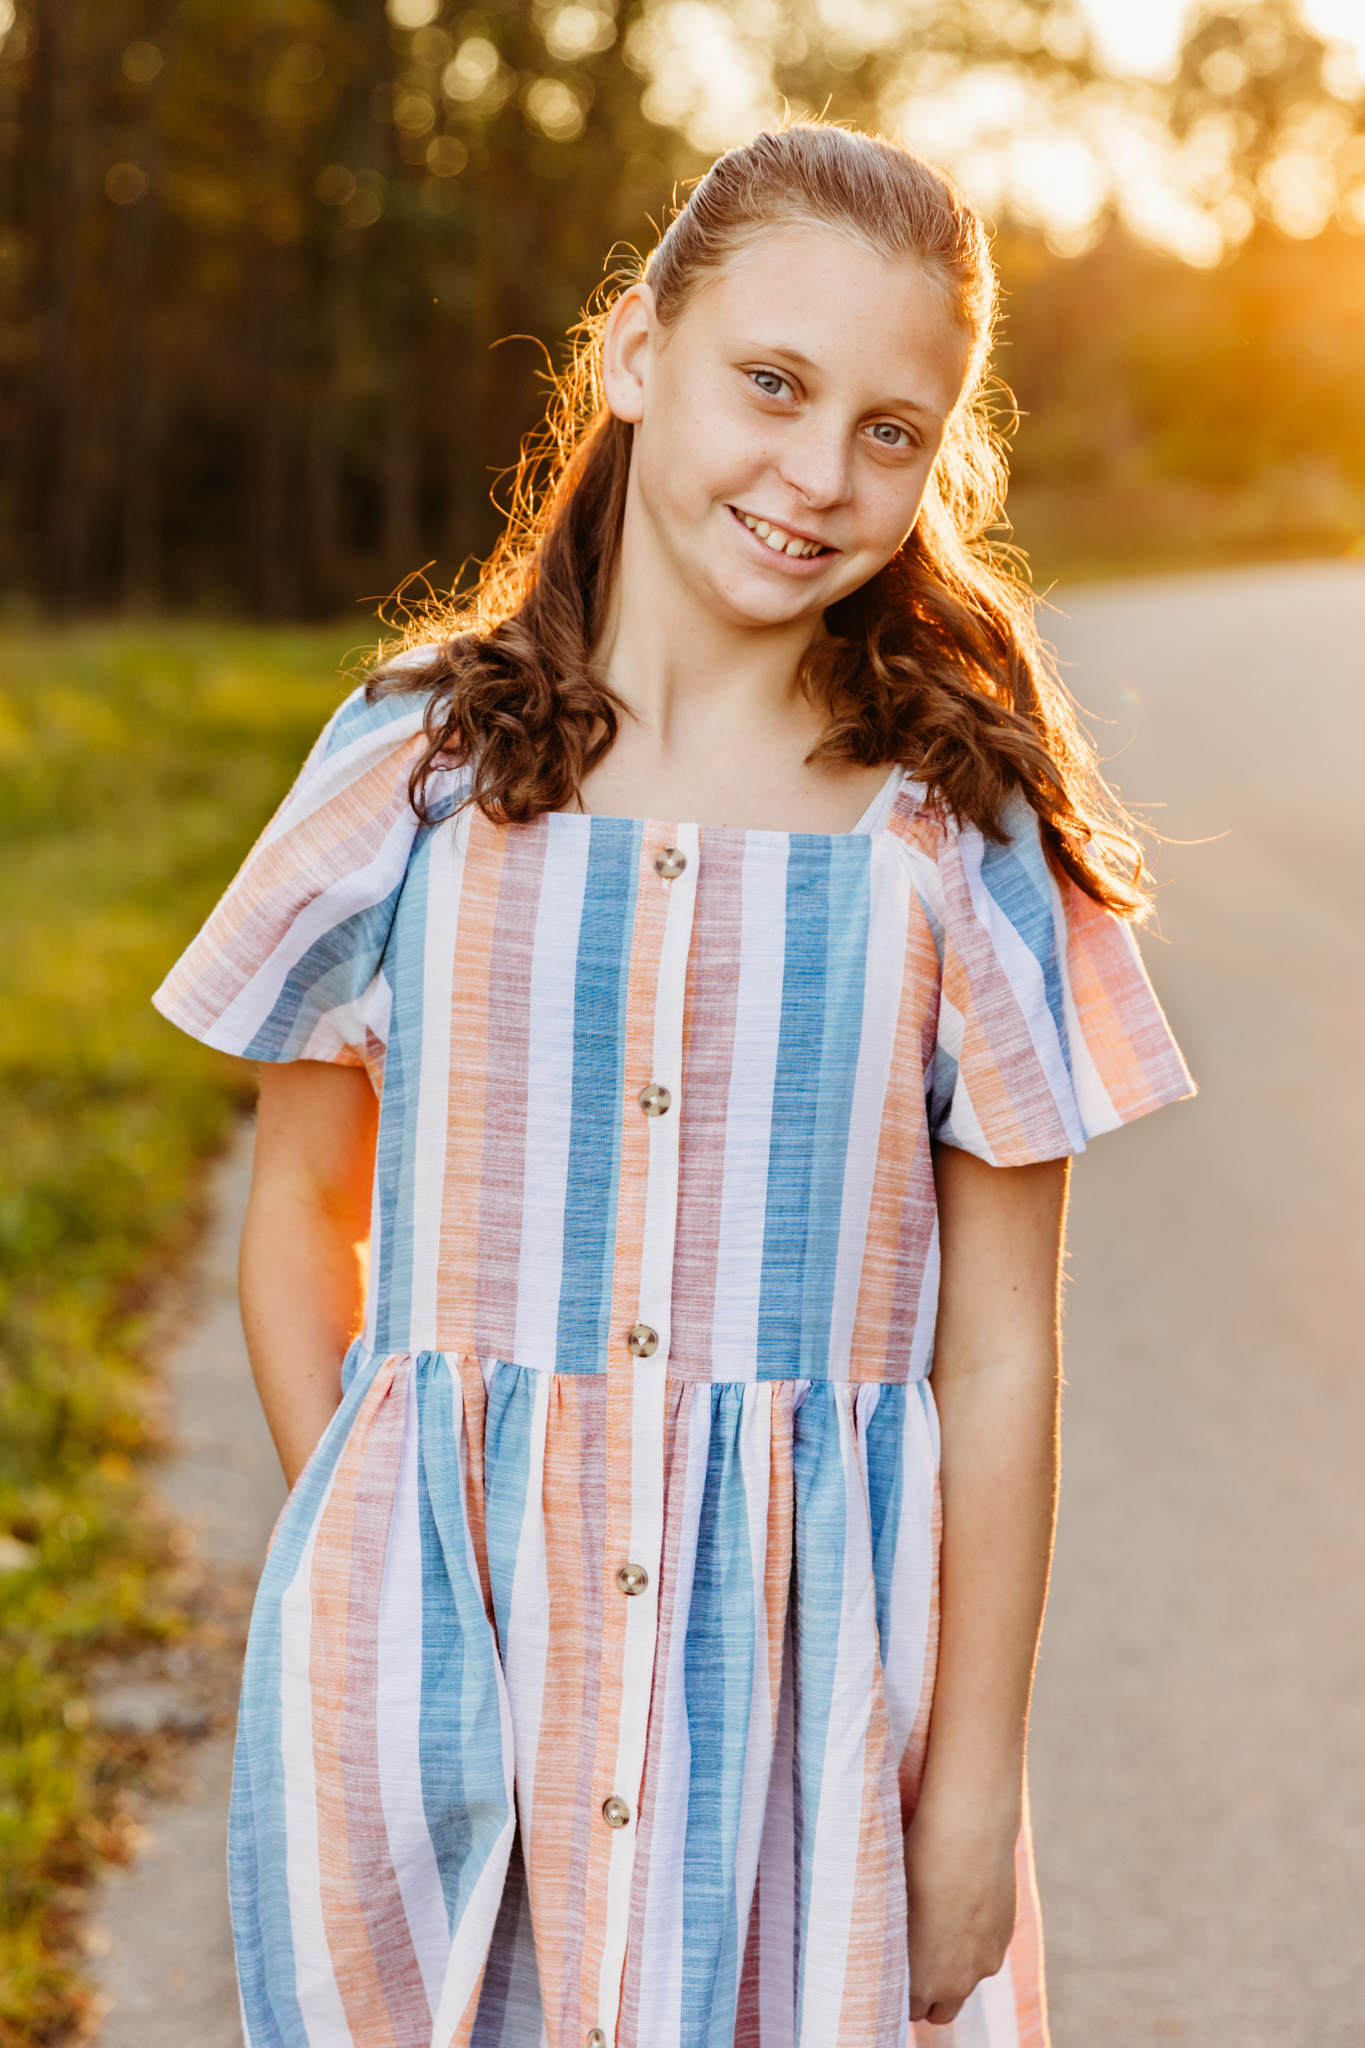 A young girl stands on a walking path at sunset in a striped dress things to do in Fond du lac